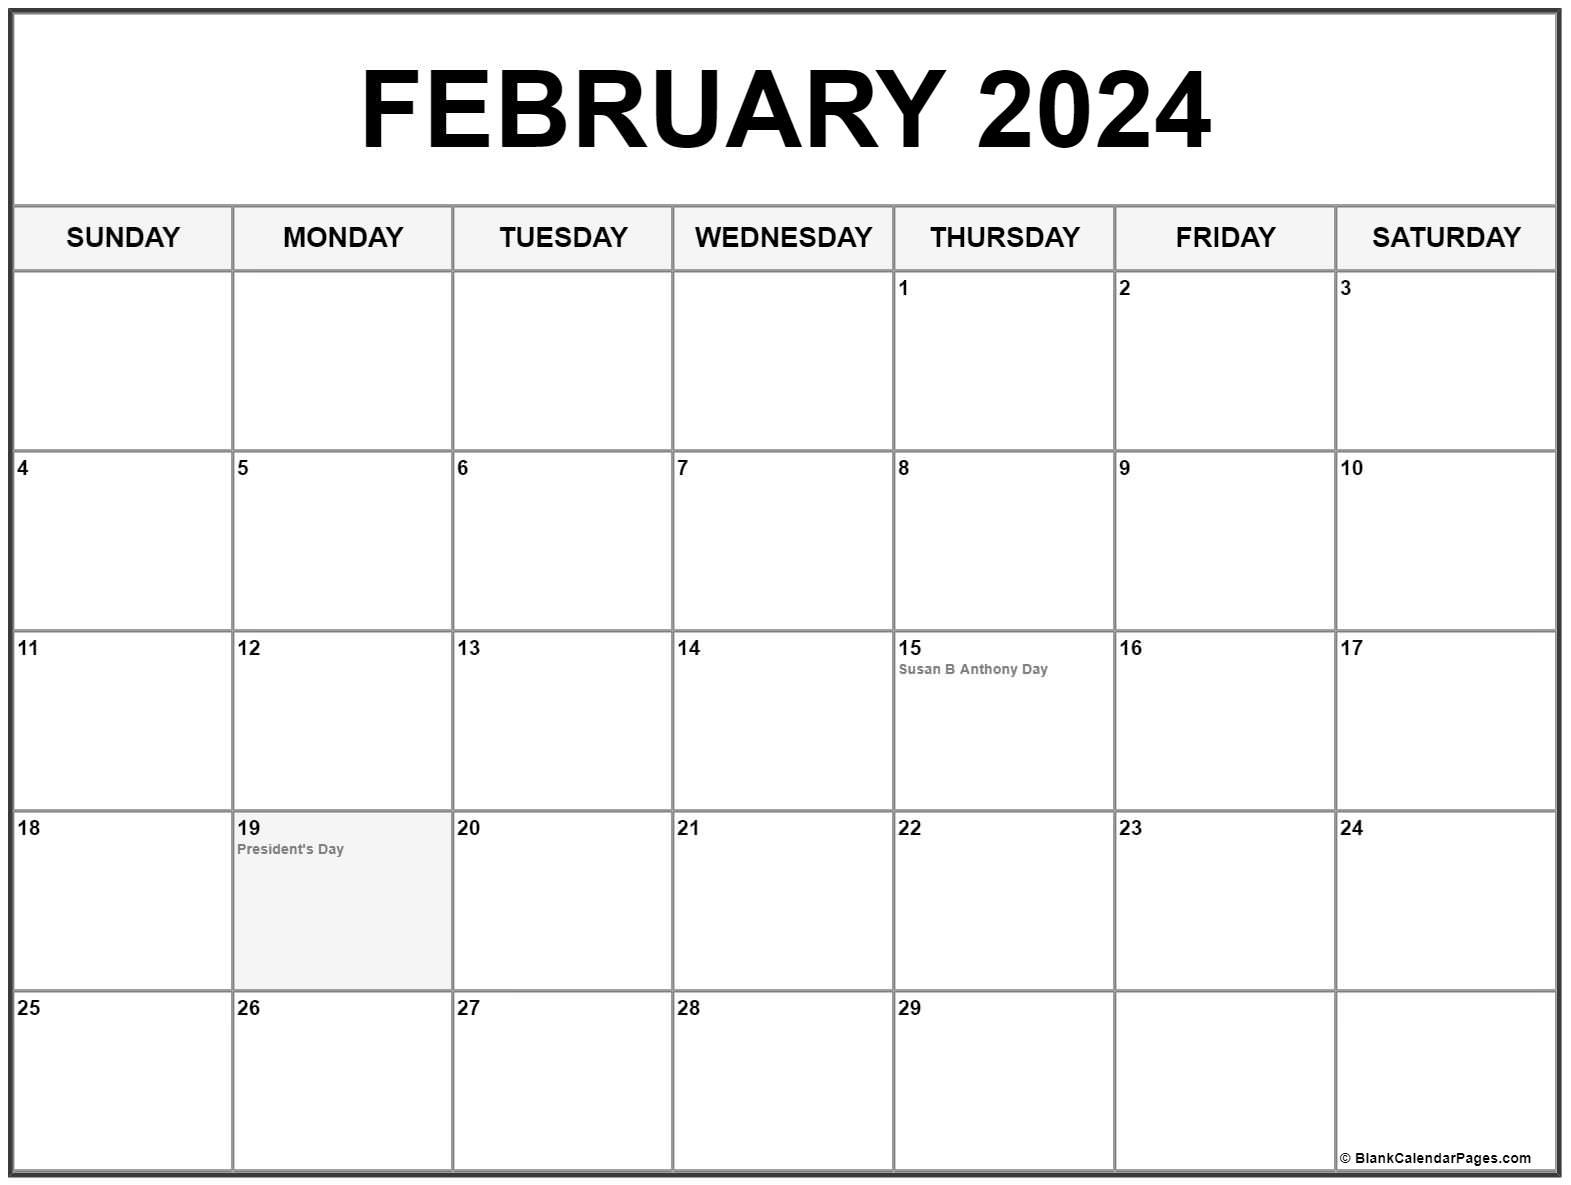 Free Calendar Template With Holidays 2023